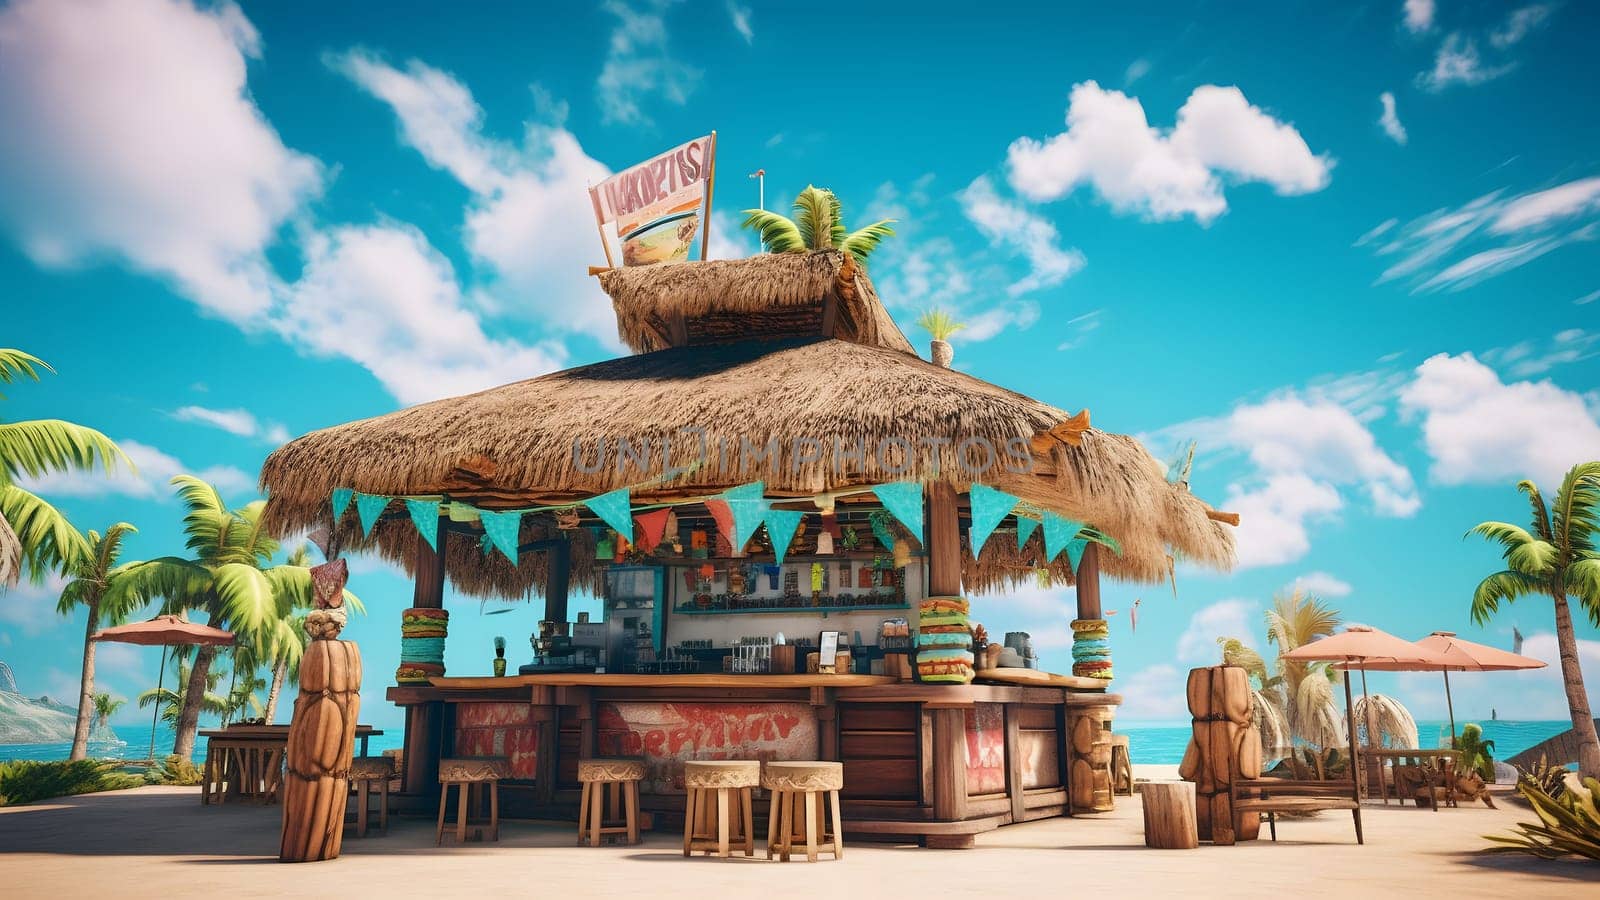 tiki bar on the beach with a palm tree and a blue sky with clouds in the background, neural network generated image by z1b